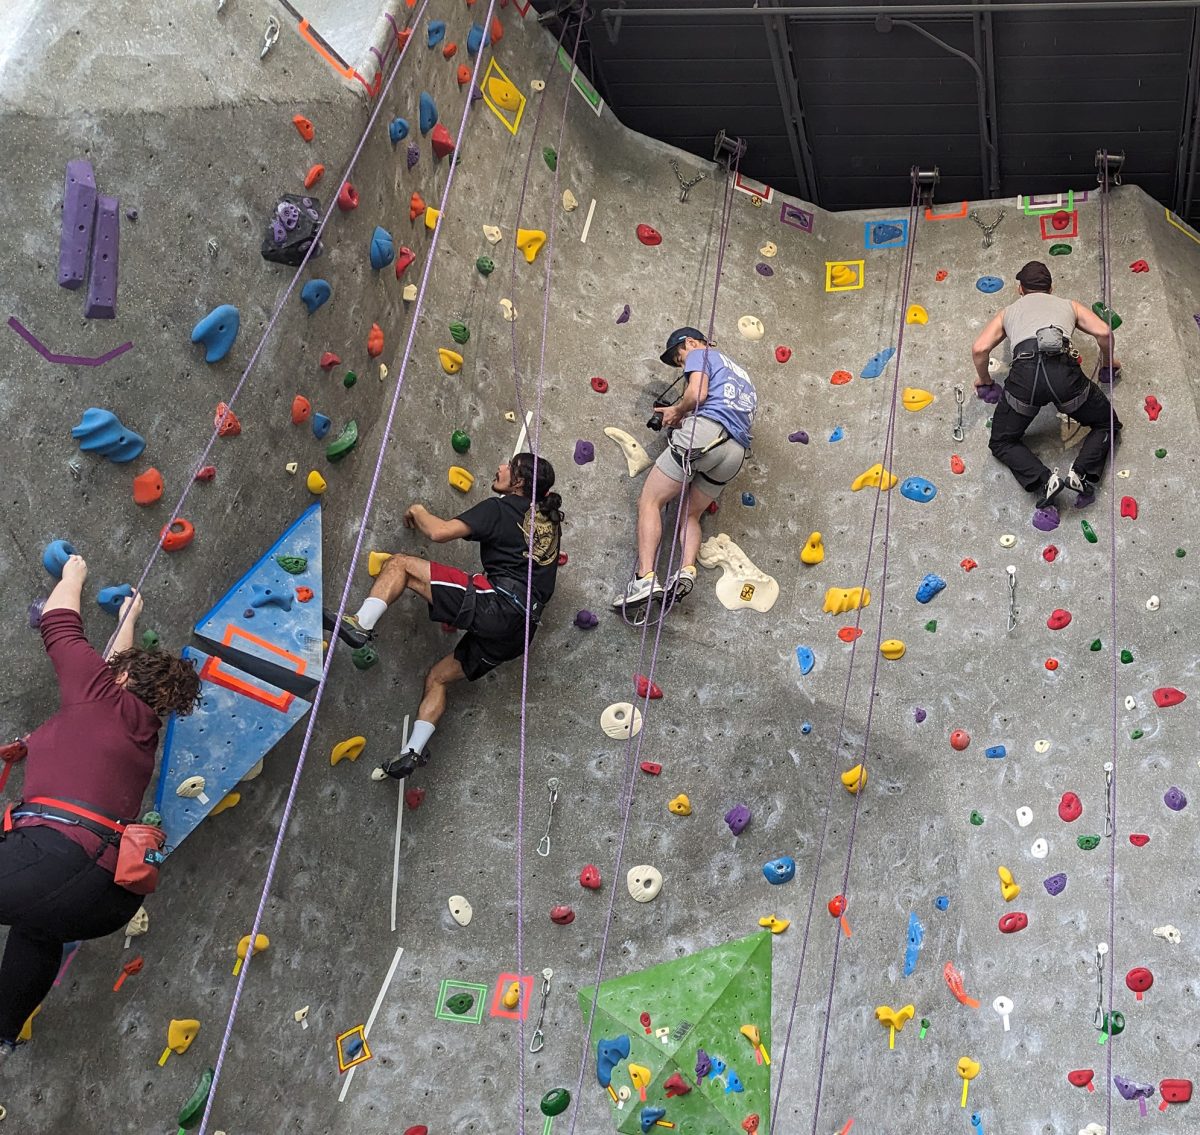 Climbers+compete+in+the+first+55+minute+round+of+climbing+to+build+up+their+route+points.+Photo+by+Micah+Torres+%2F+Antelope+Staff